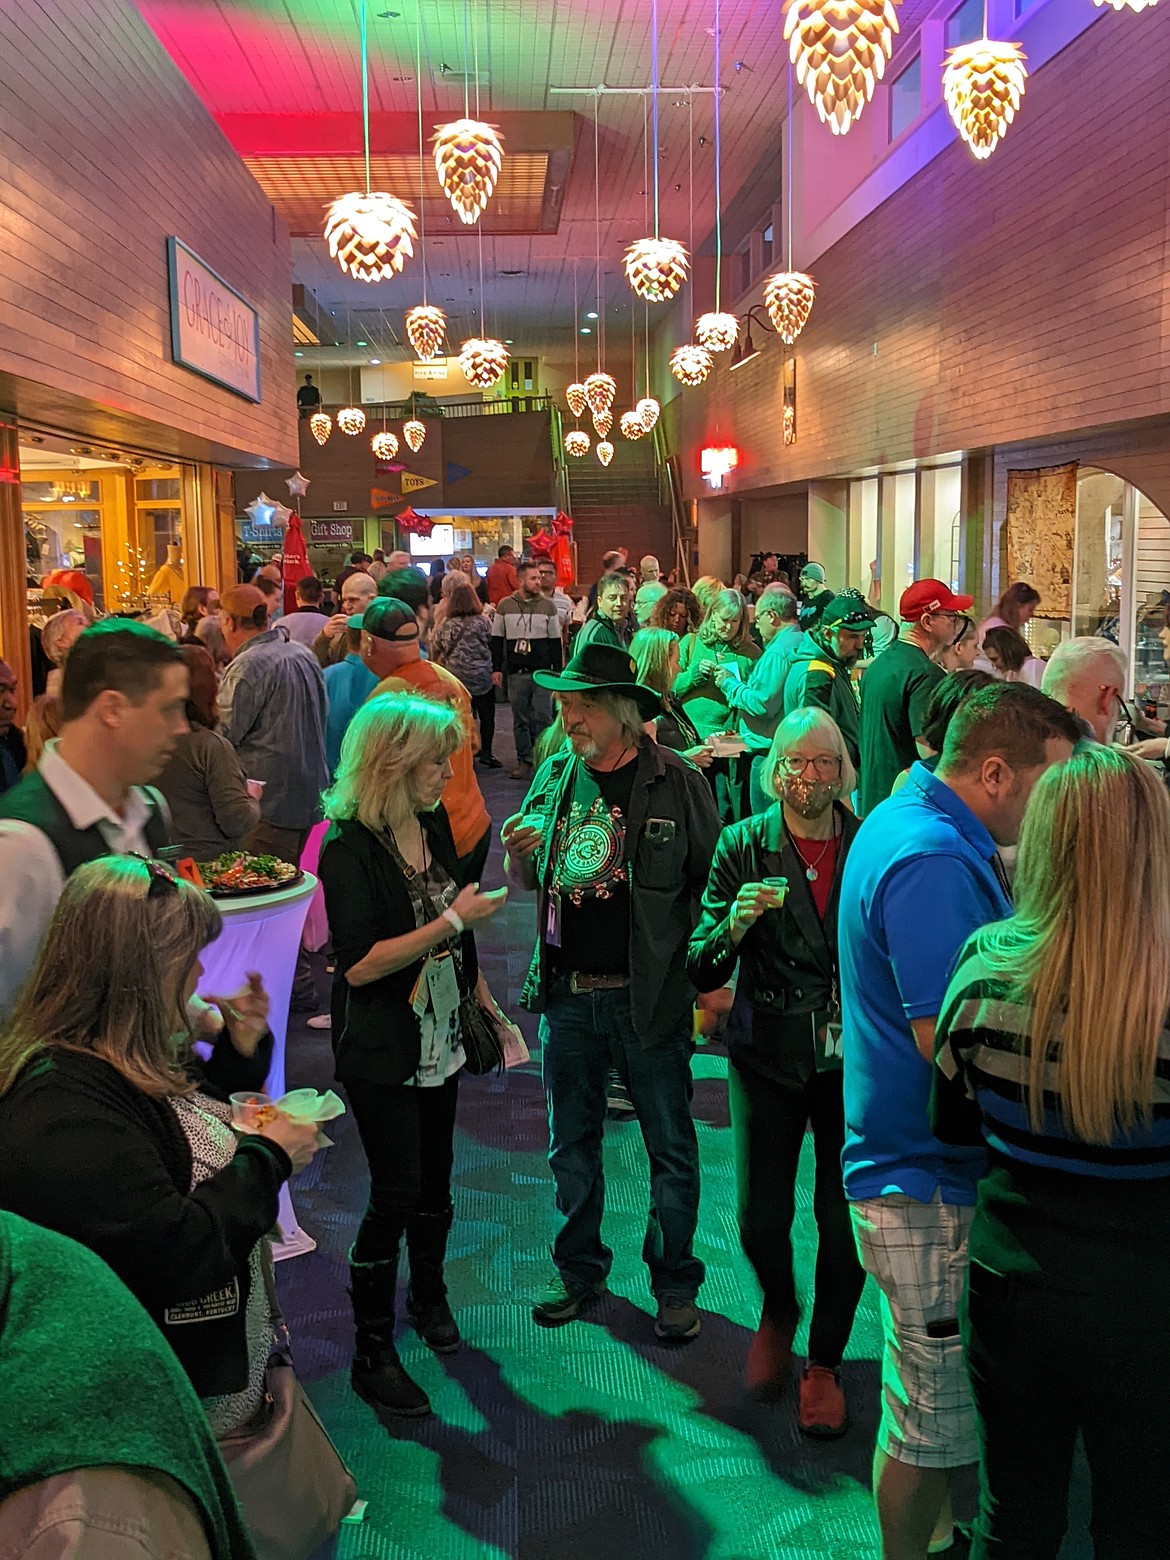 Bartender's Ball attendees pack into the decorated hallways of the The Resort Plaza Shops in downtown Coeur d’Alene Saturday night. The sold out event had more than 350 people show up to support Help Every Little Paw.